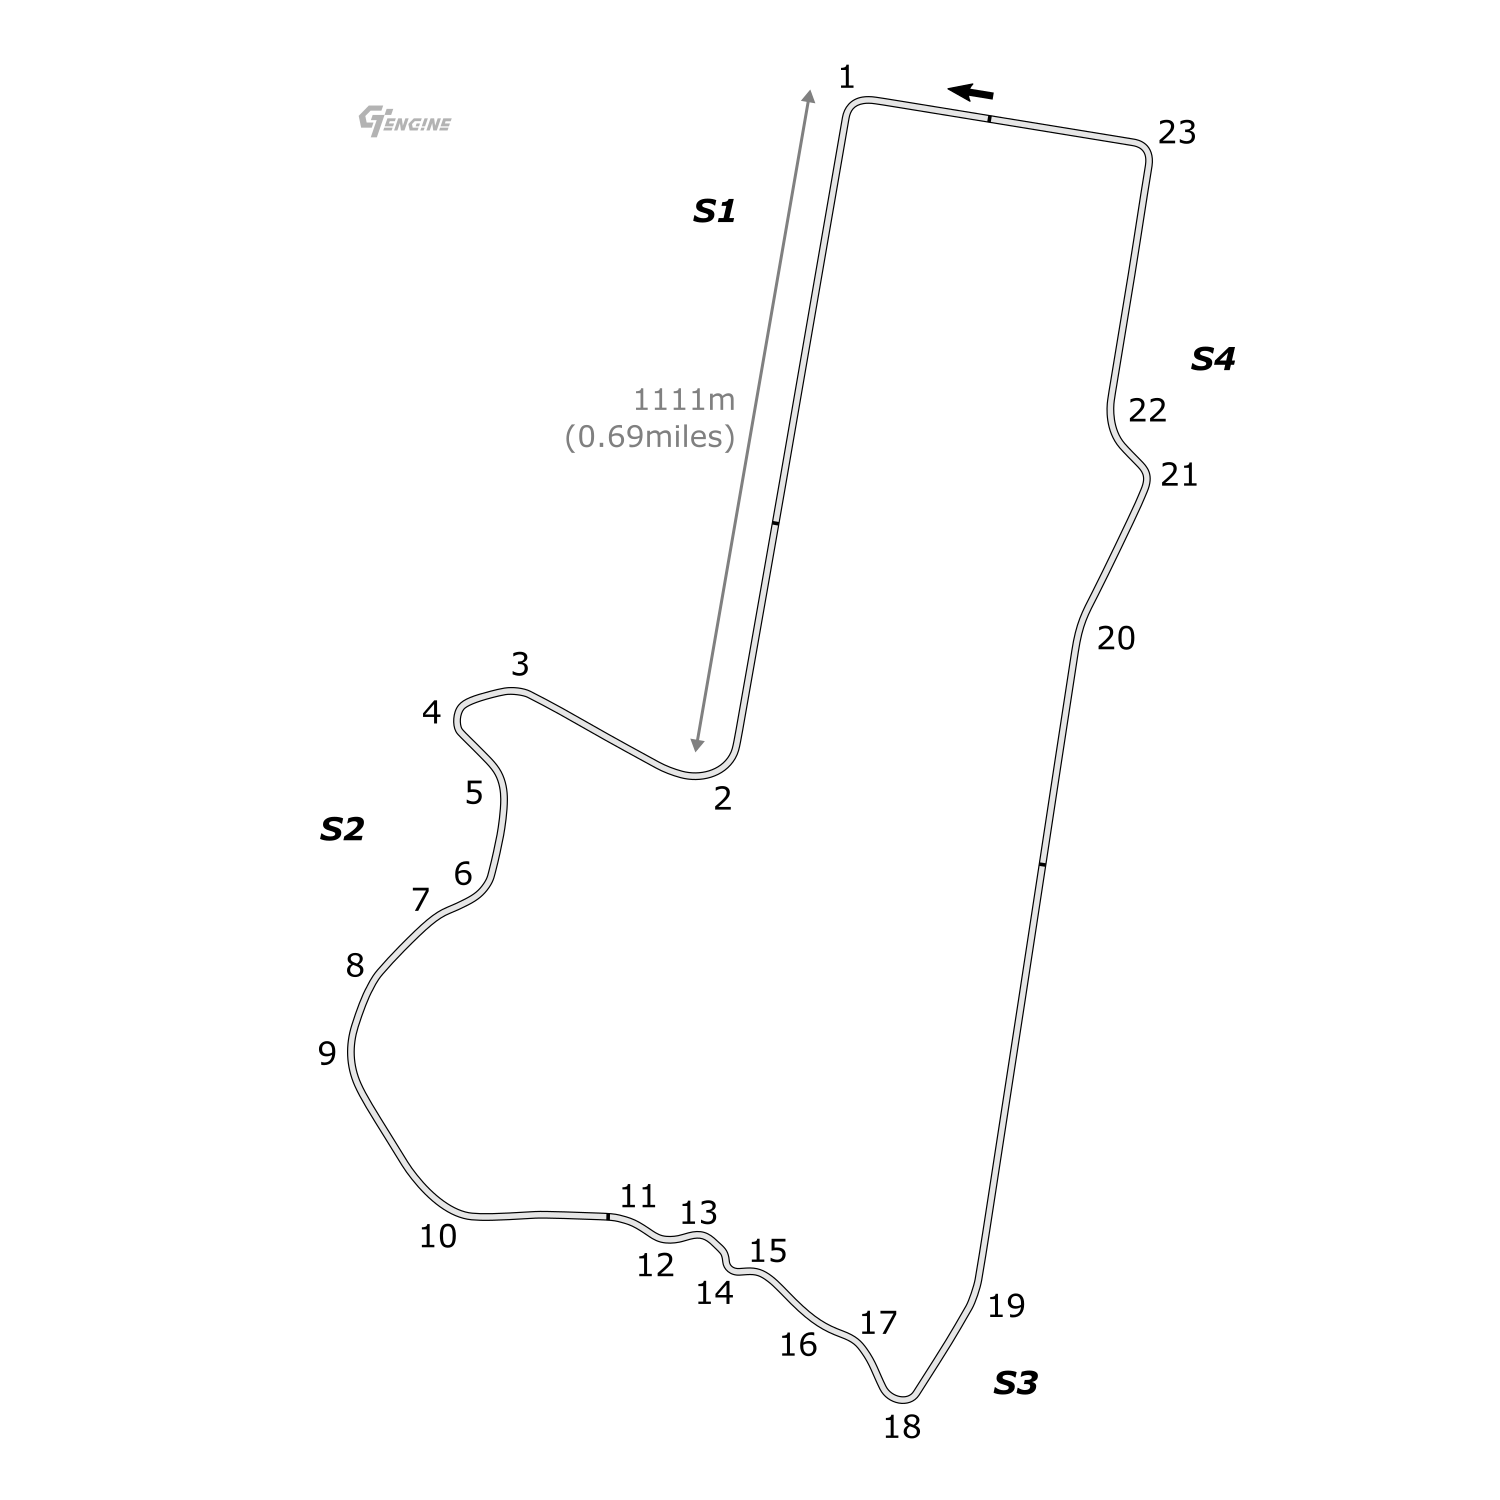 Mount Panorama track map